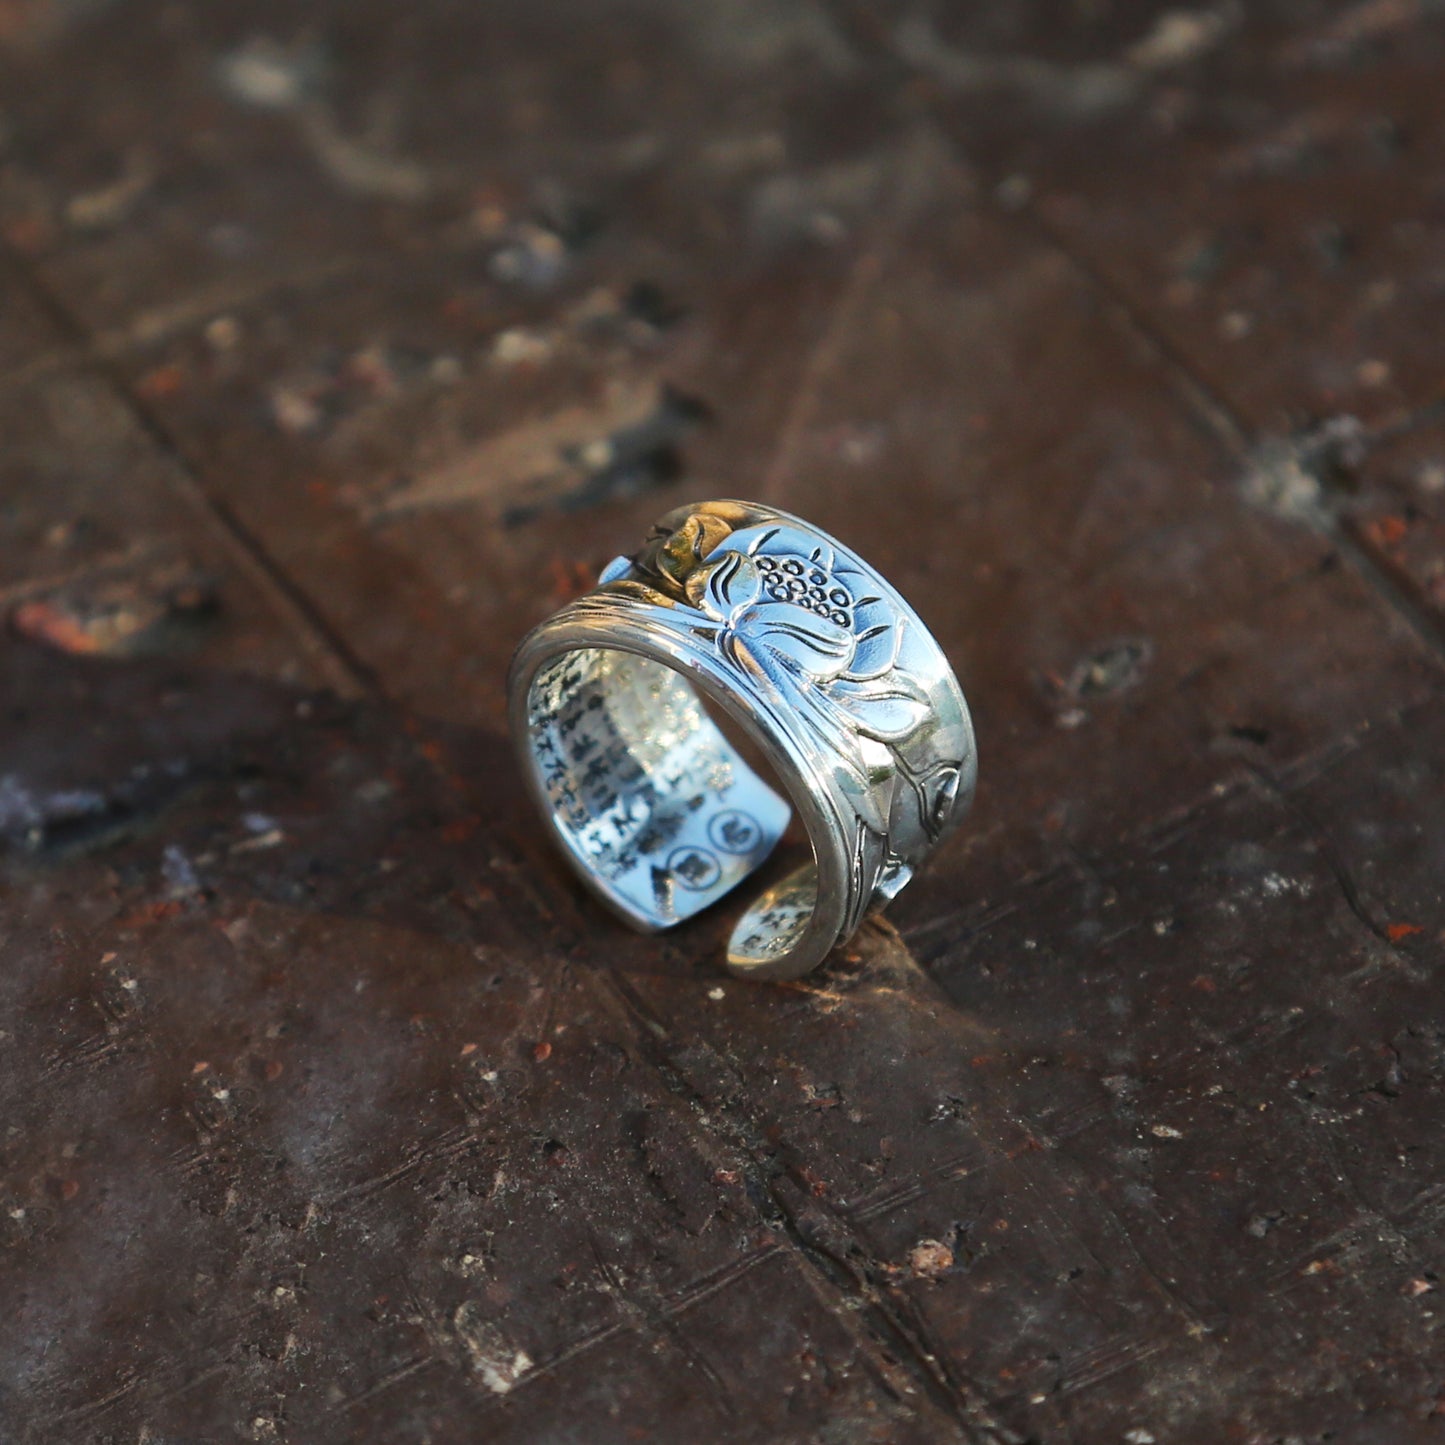 Shiny Glossy Lotus with Buddhist Sutra Adjustable Silver Ring, Tibetan Buddhist Ring, Om Ring (S)